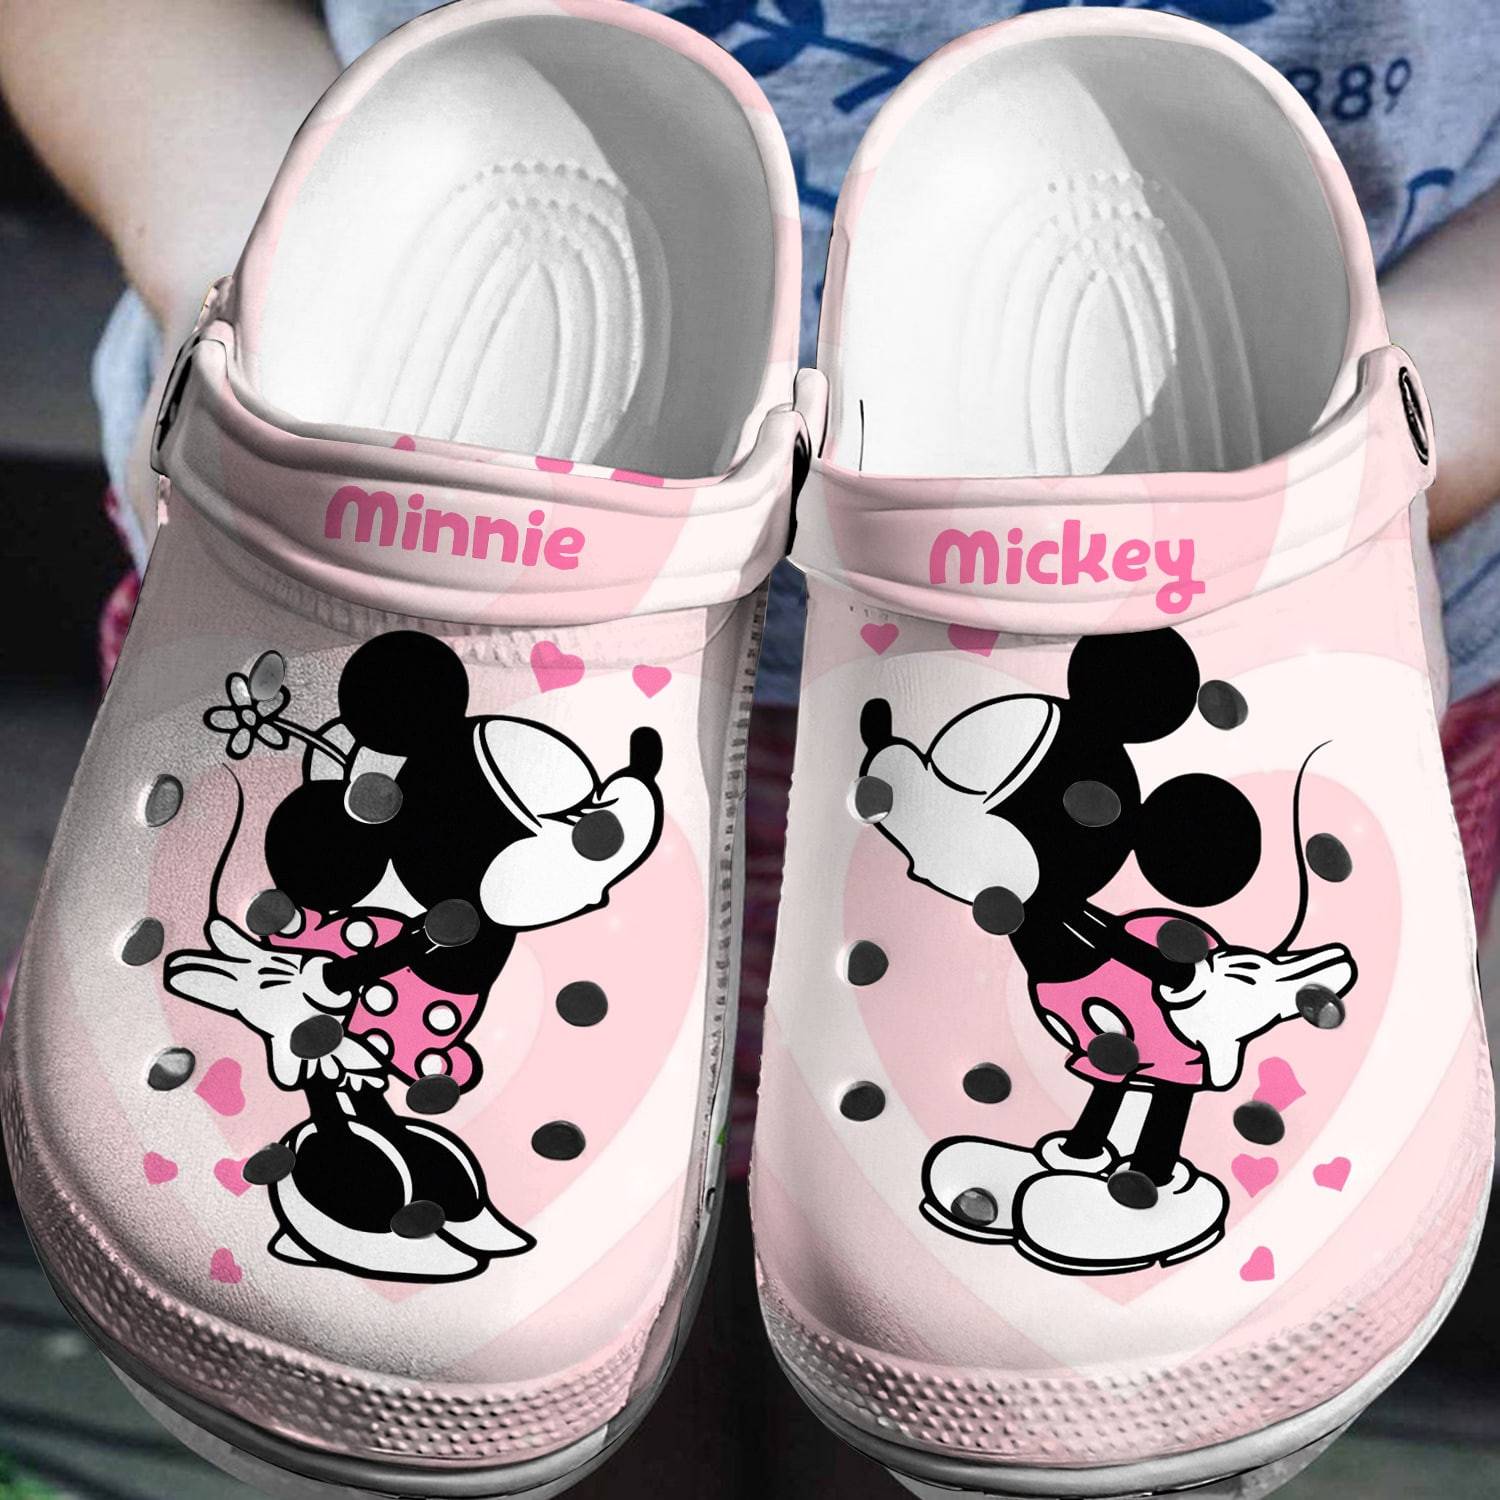 Mickey Minnie Magic: 3D Clog Shoes by Crocs – Experience the Disney Wonder